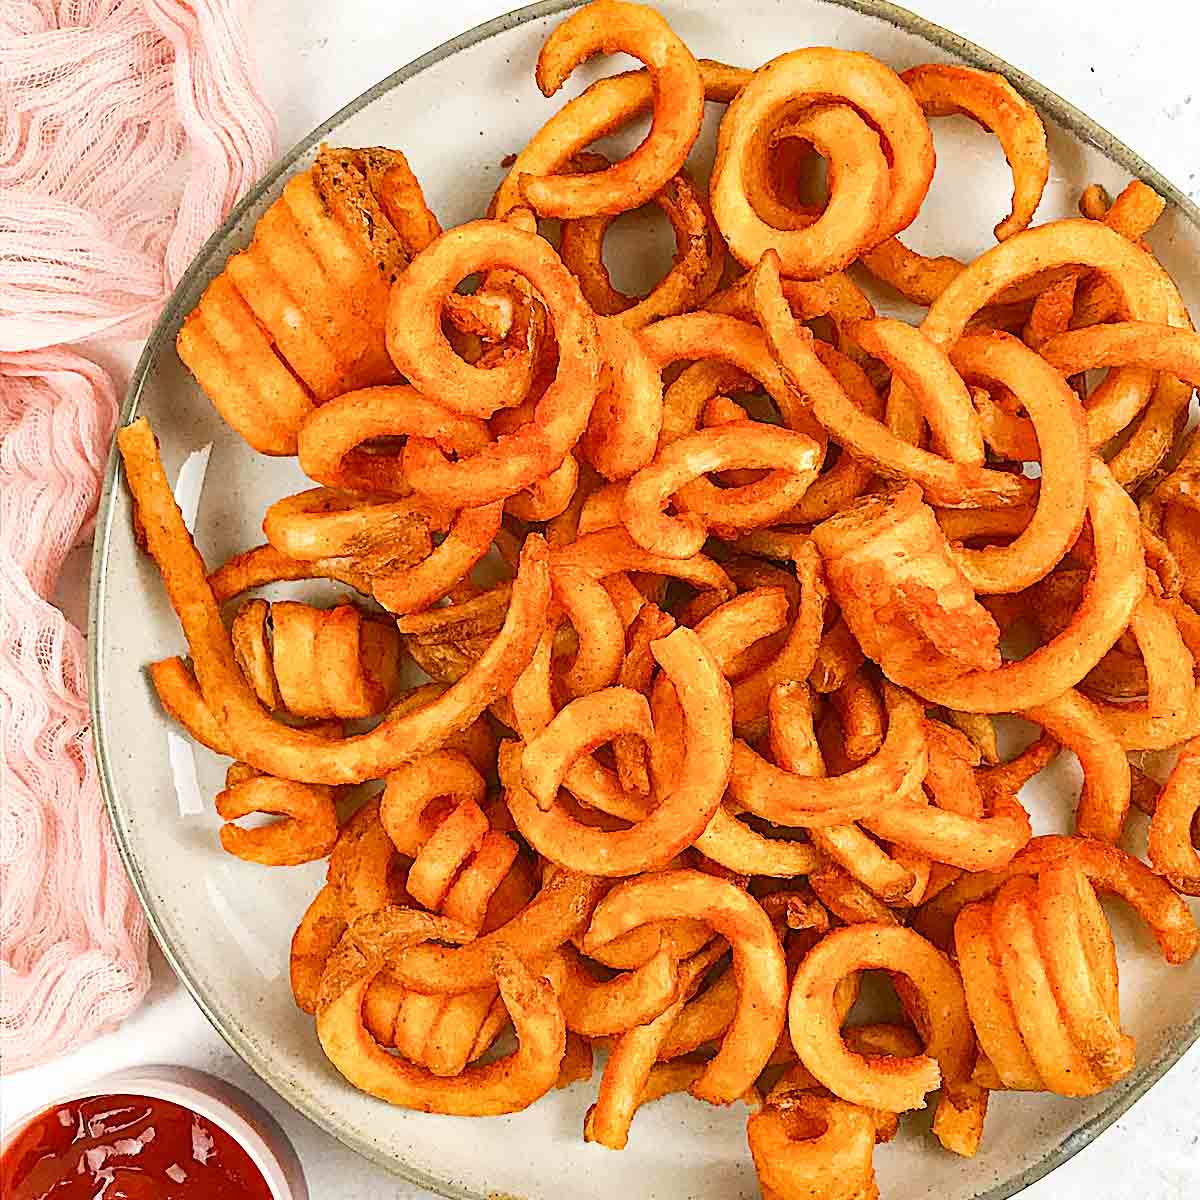 Air Fryer Frozen Curly Fries - The Live-In Kitchen